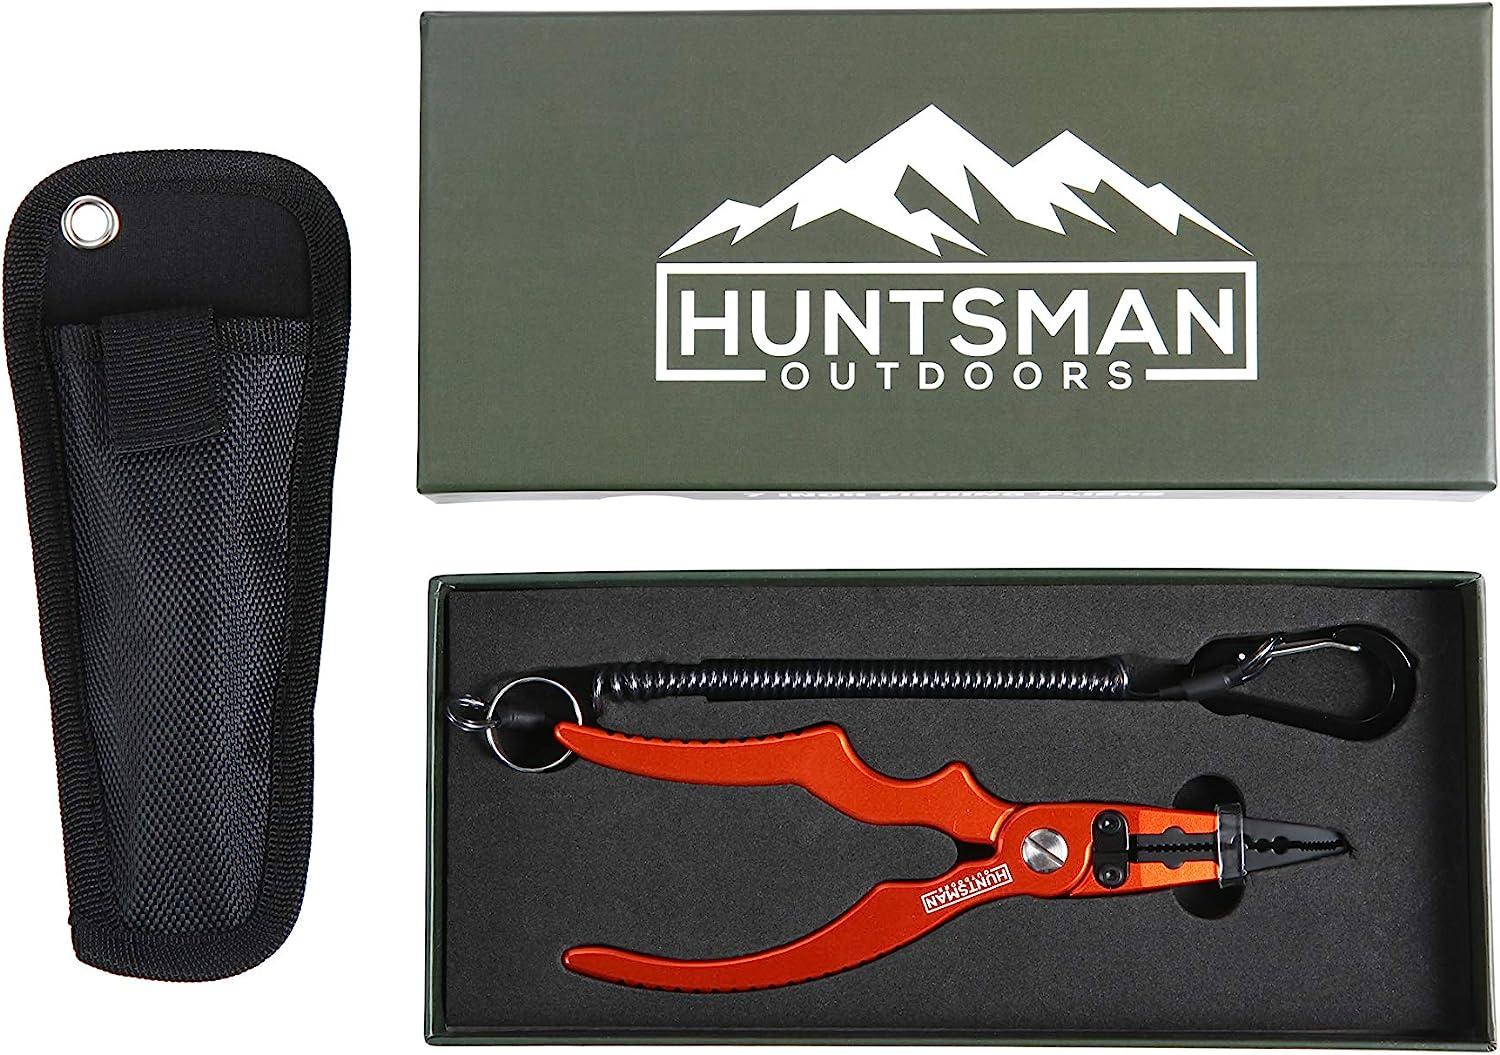 Huntsman Outdoors 7 inch Fishing Pliers - Fishing Gear for Split Ring, Fish  Hook Remover & Line Cutter